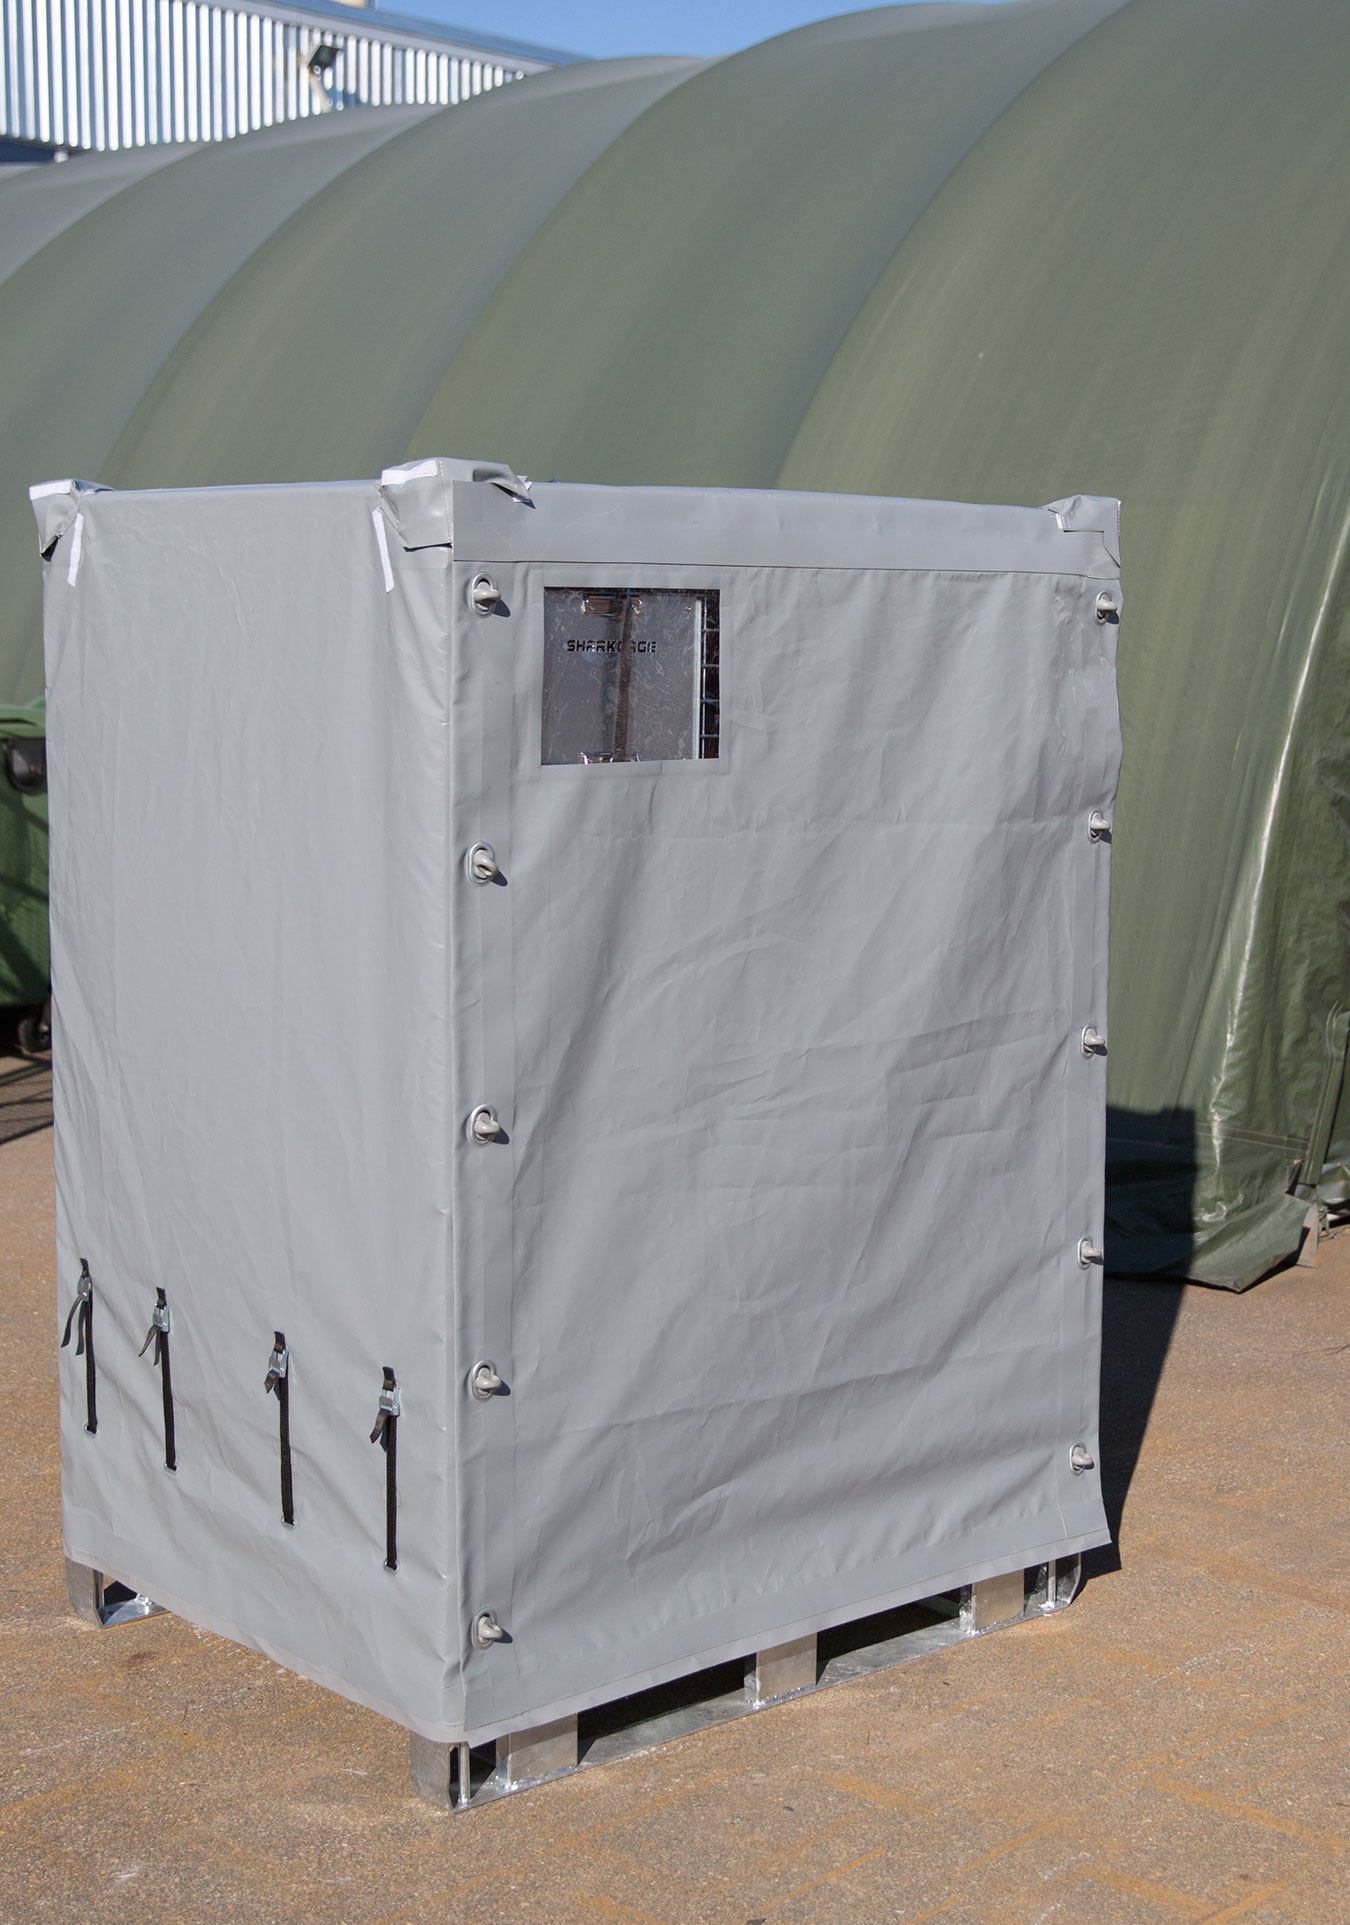 Deployment Locker Covered in the Field